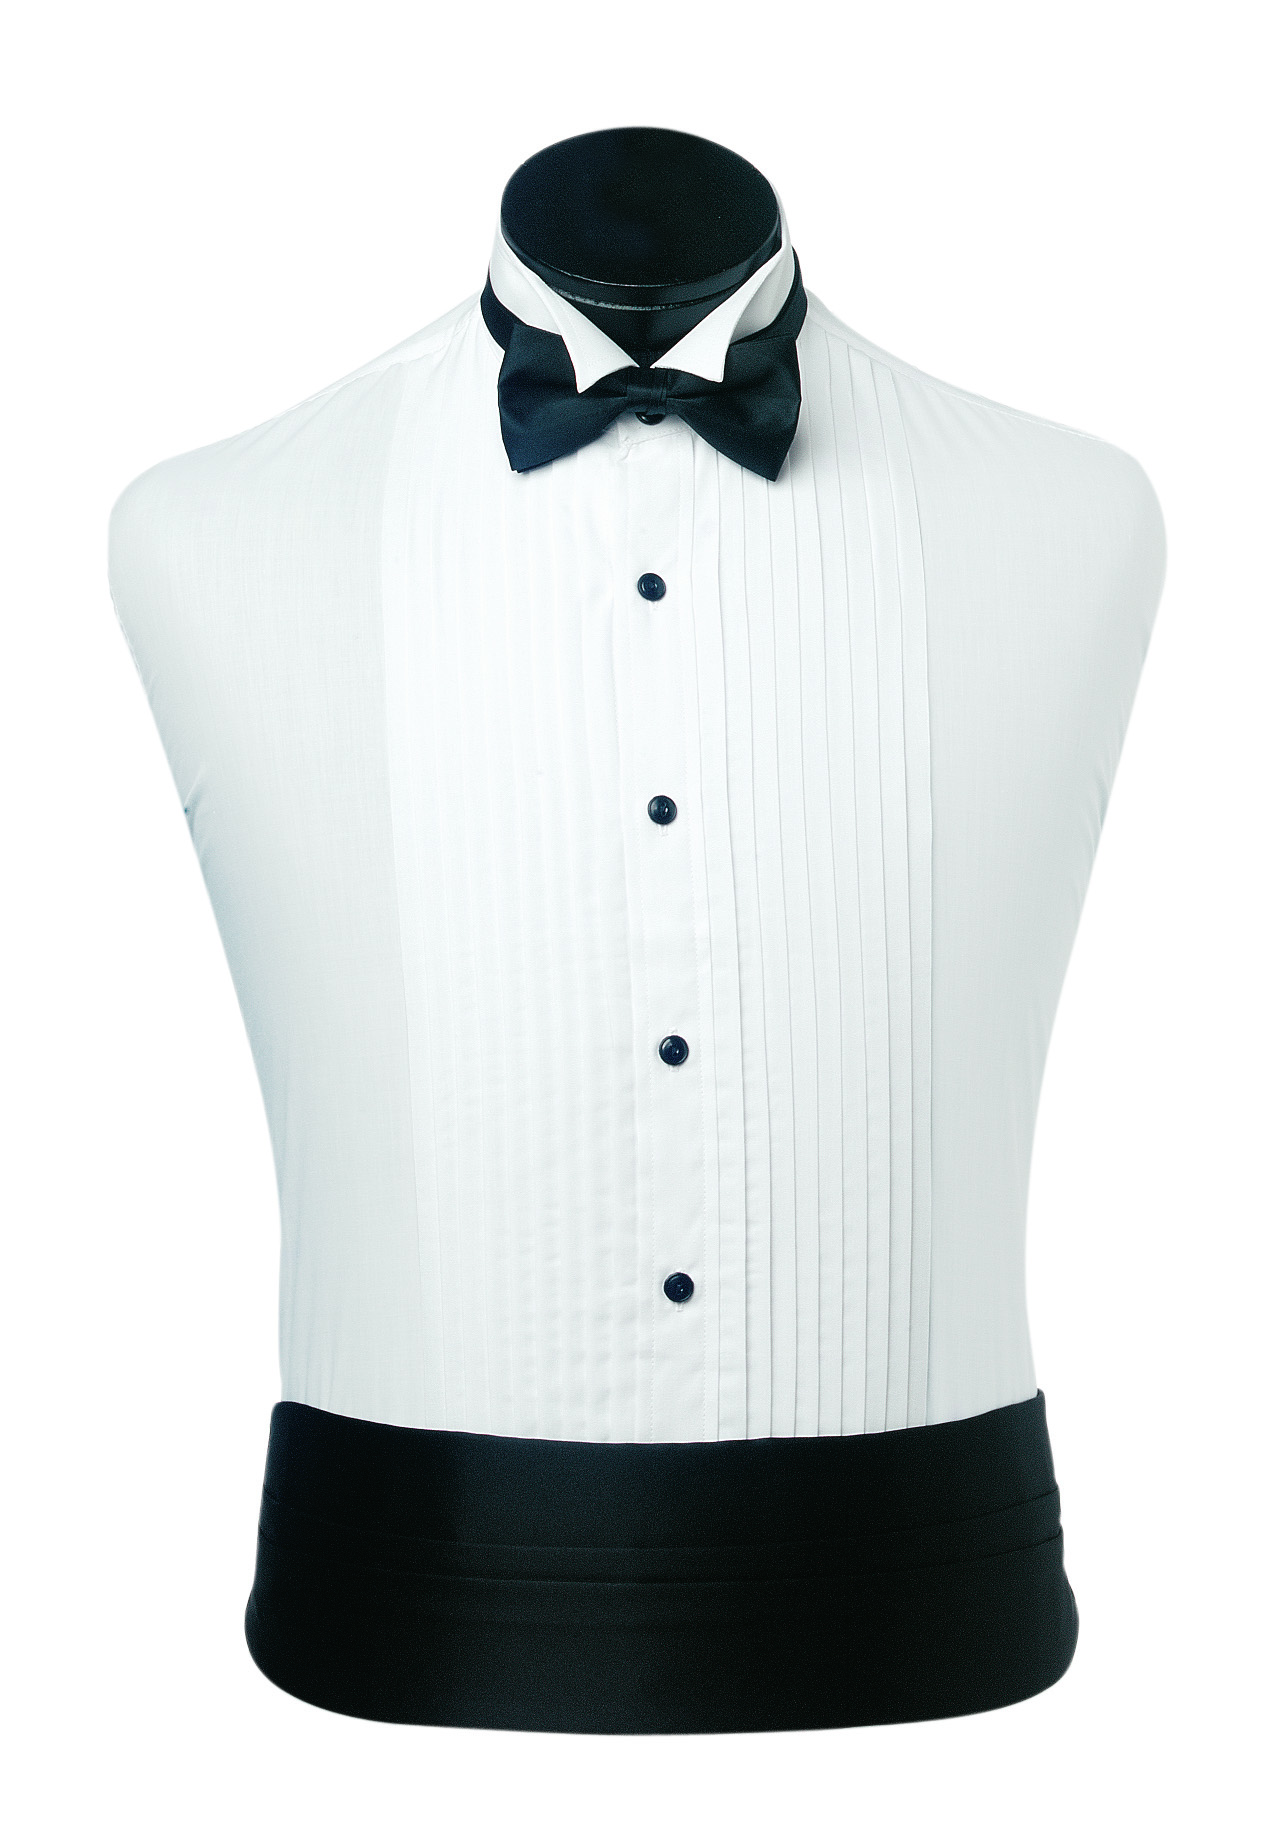 This Formal Shirt Features Wing Pleated Front & Black Buttons